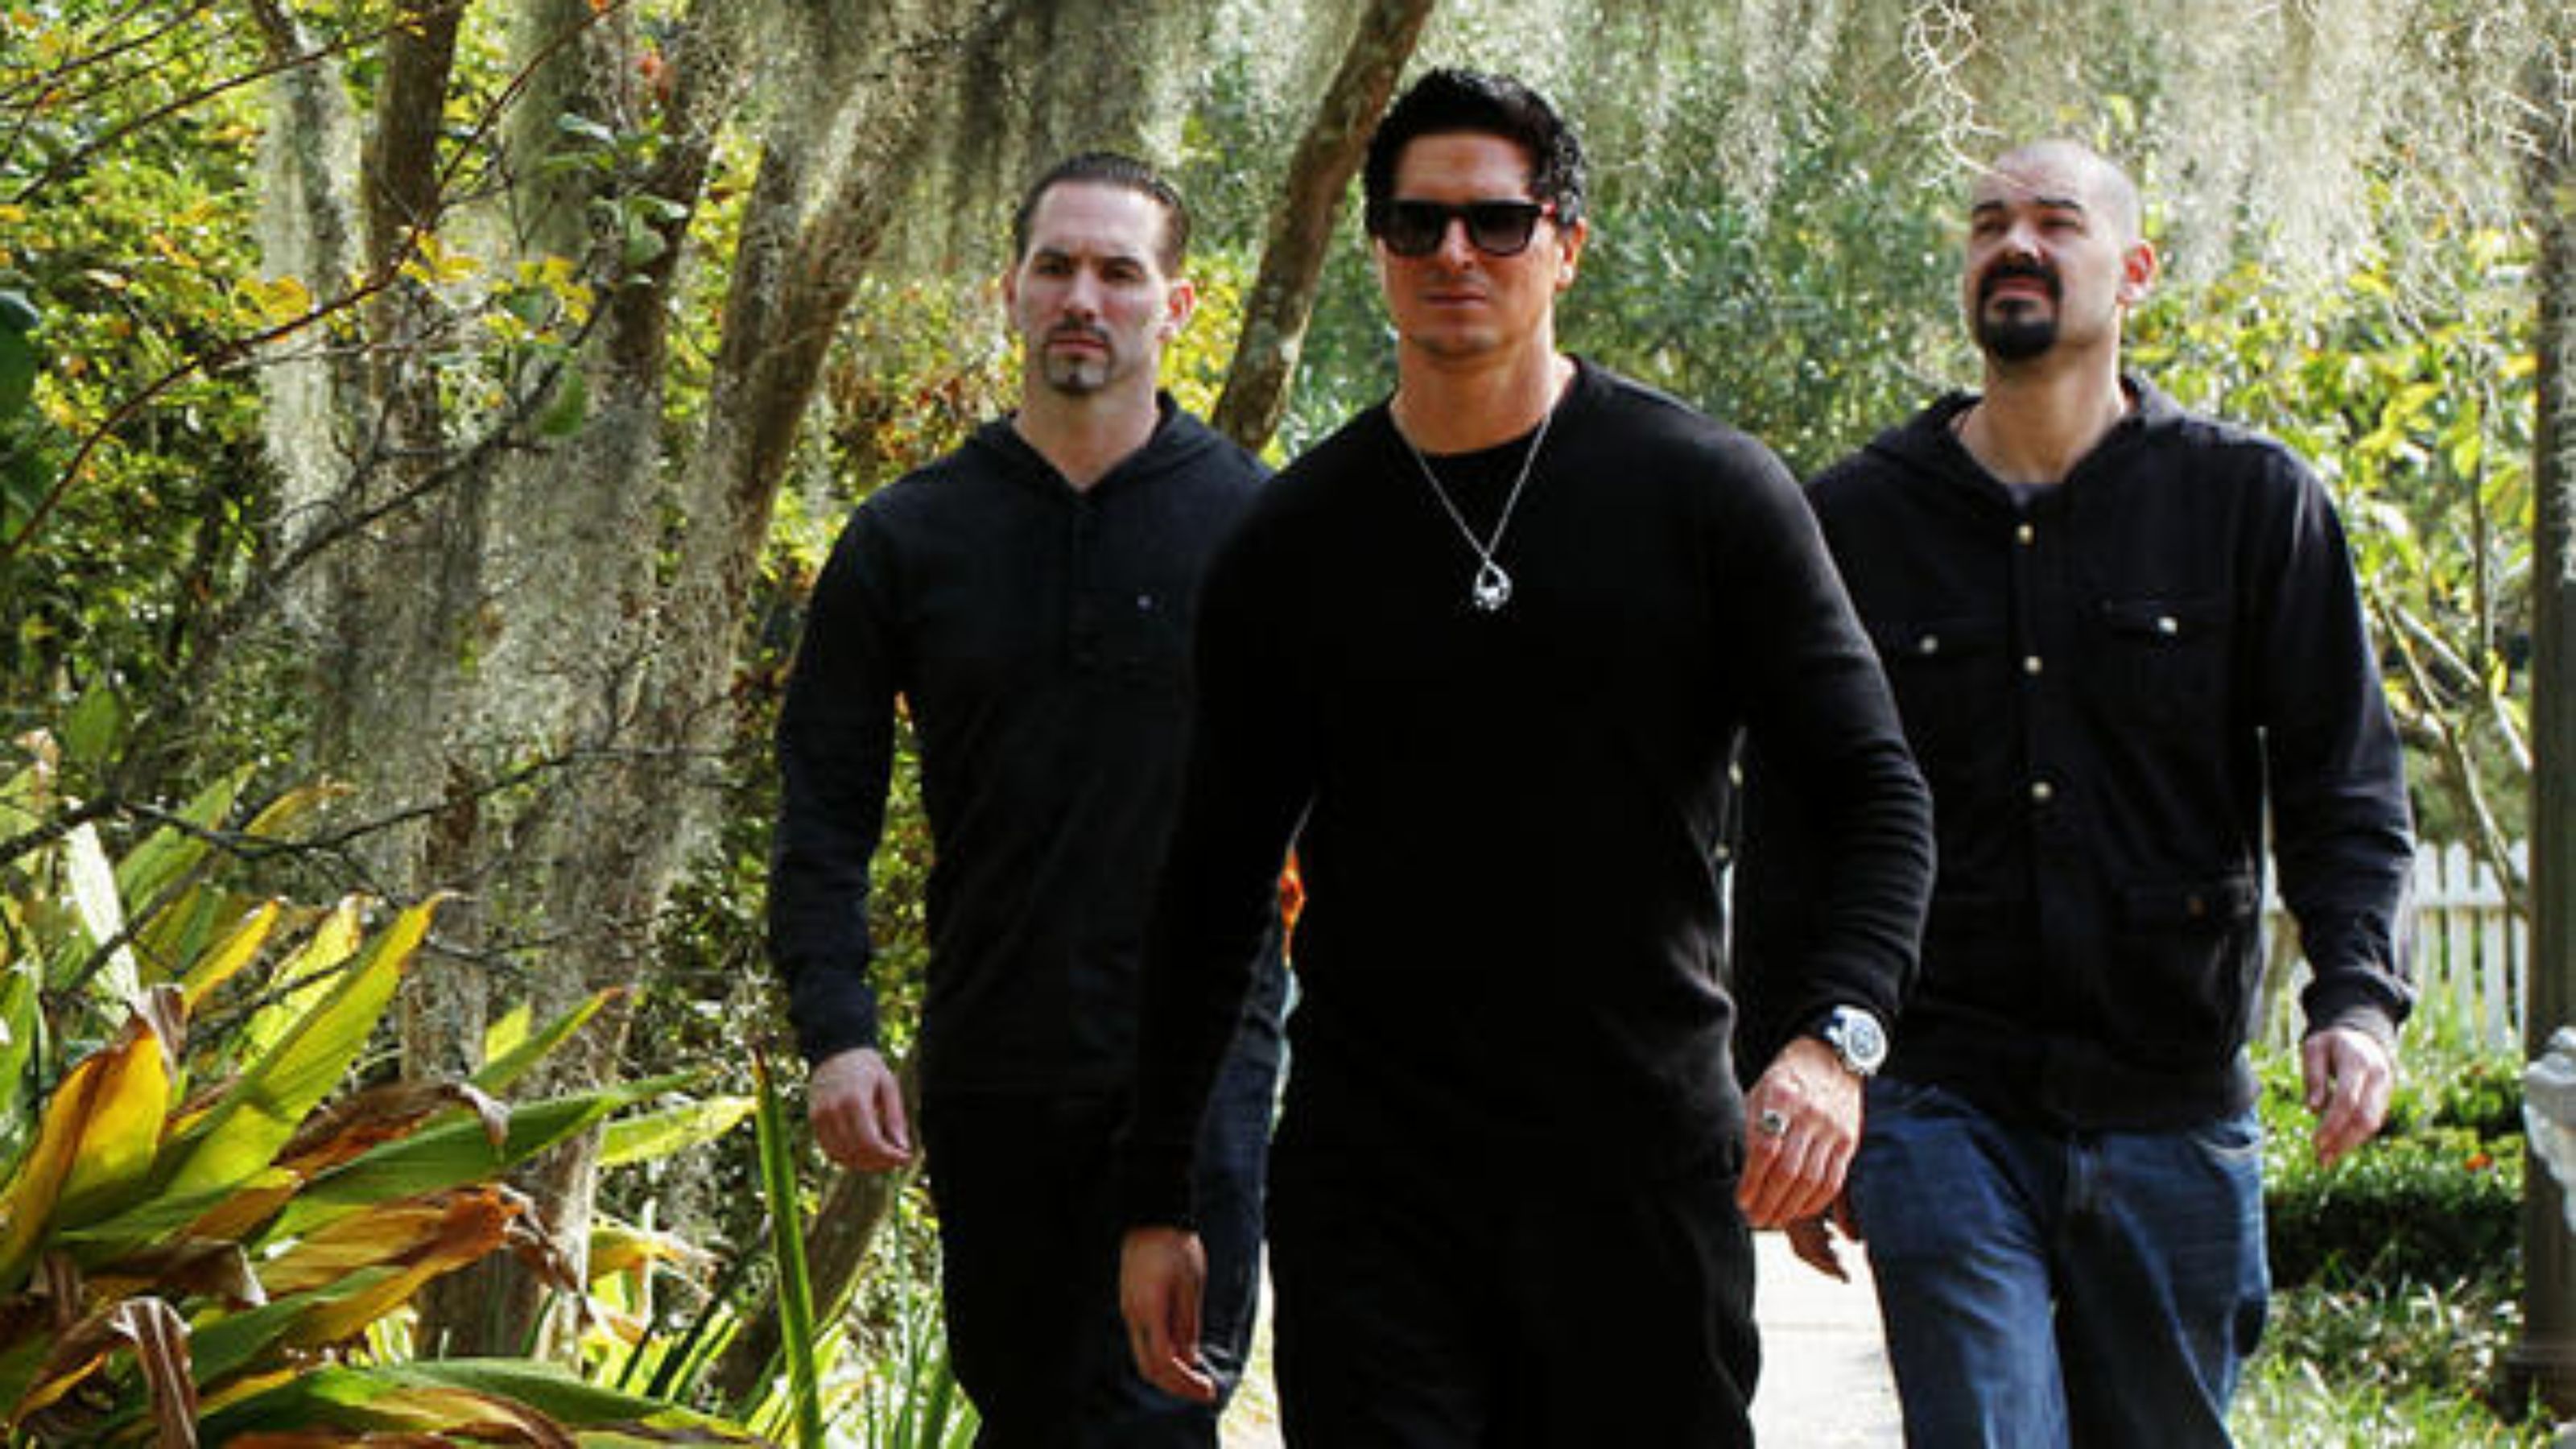 Free Ghost Adventures Wallpaper is hd wallpapers & backgrounds for desk...